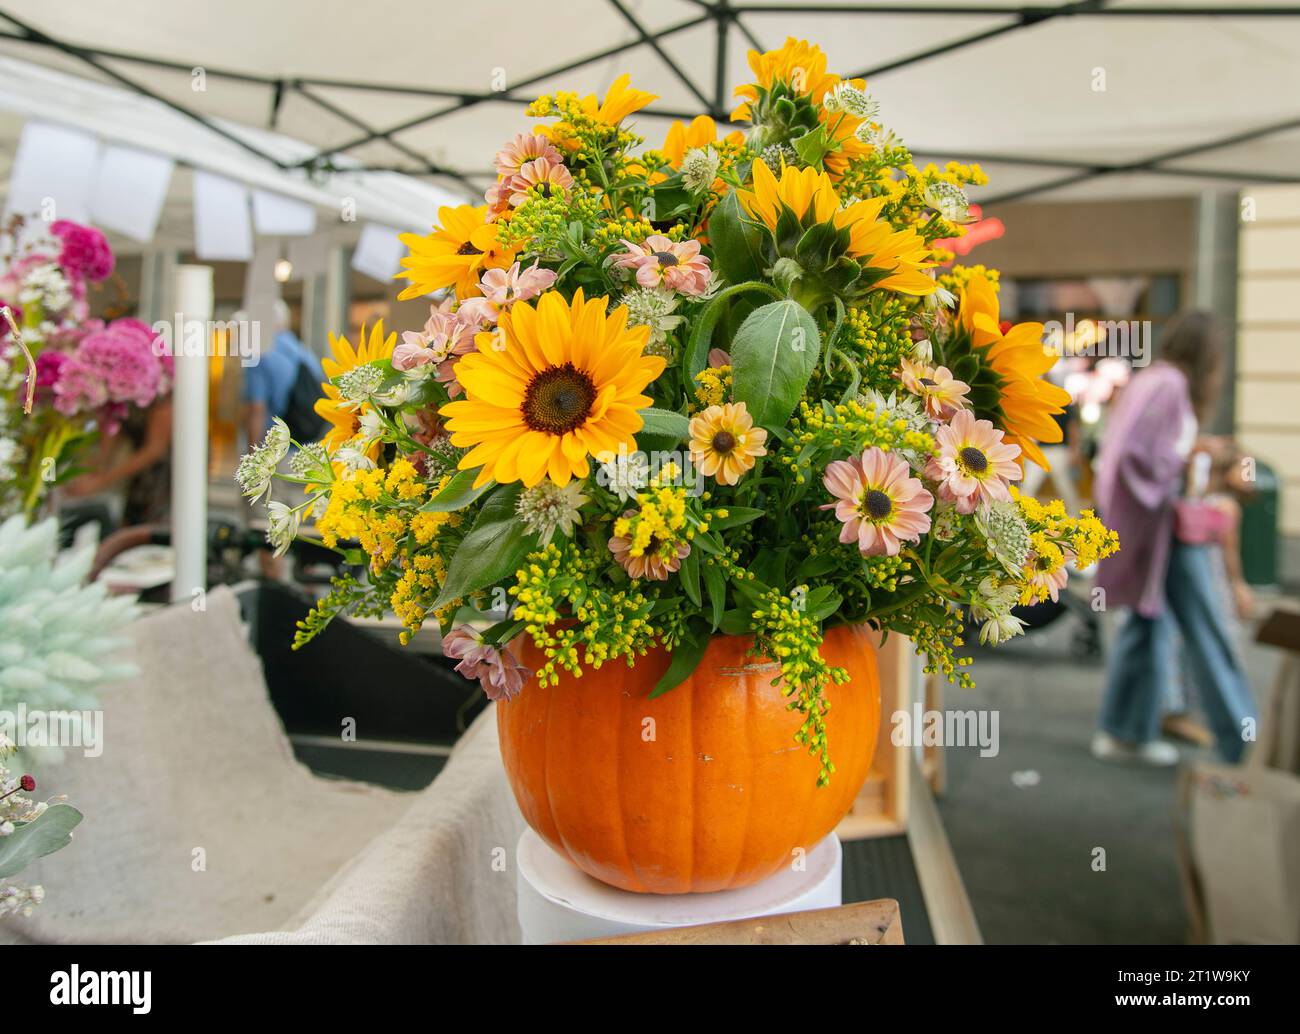 Italy Piedmont Turin Via Roma of the Floricola exhibition-market - flowers in a pumpkin like vase Credit: Realy Easy Star/Alamy Live News Stock Photo